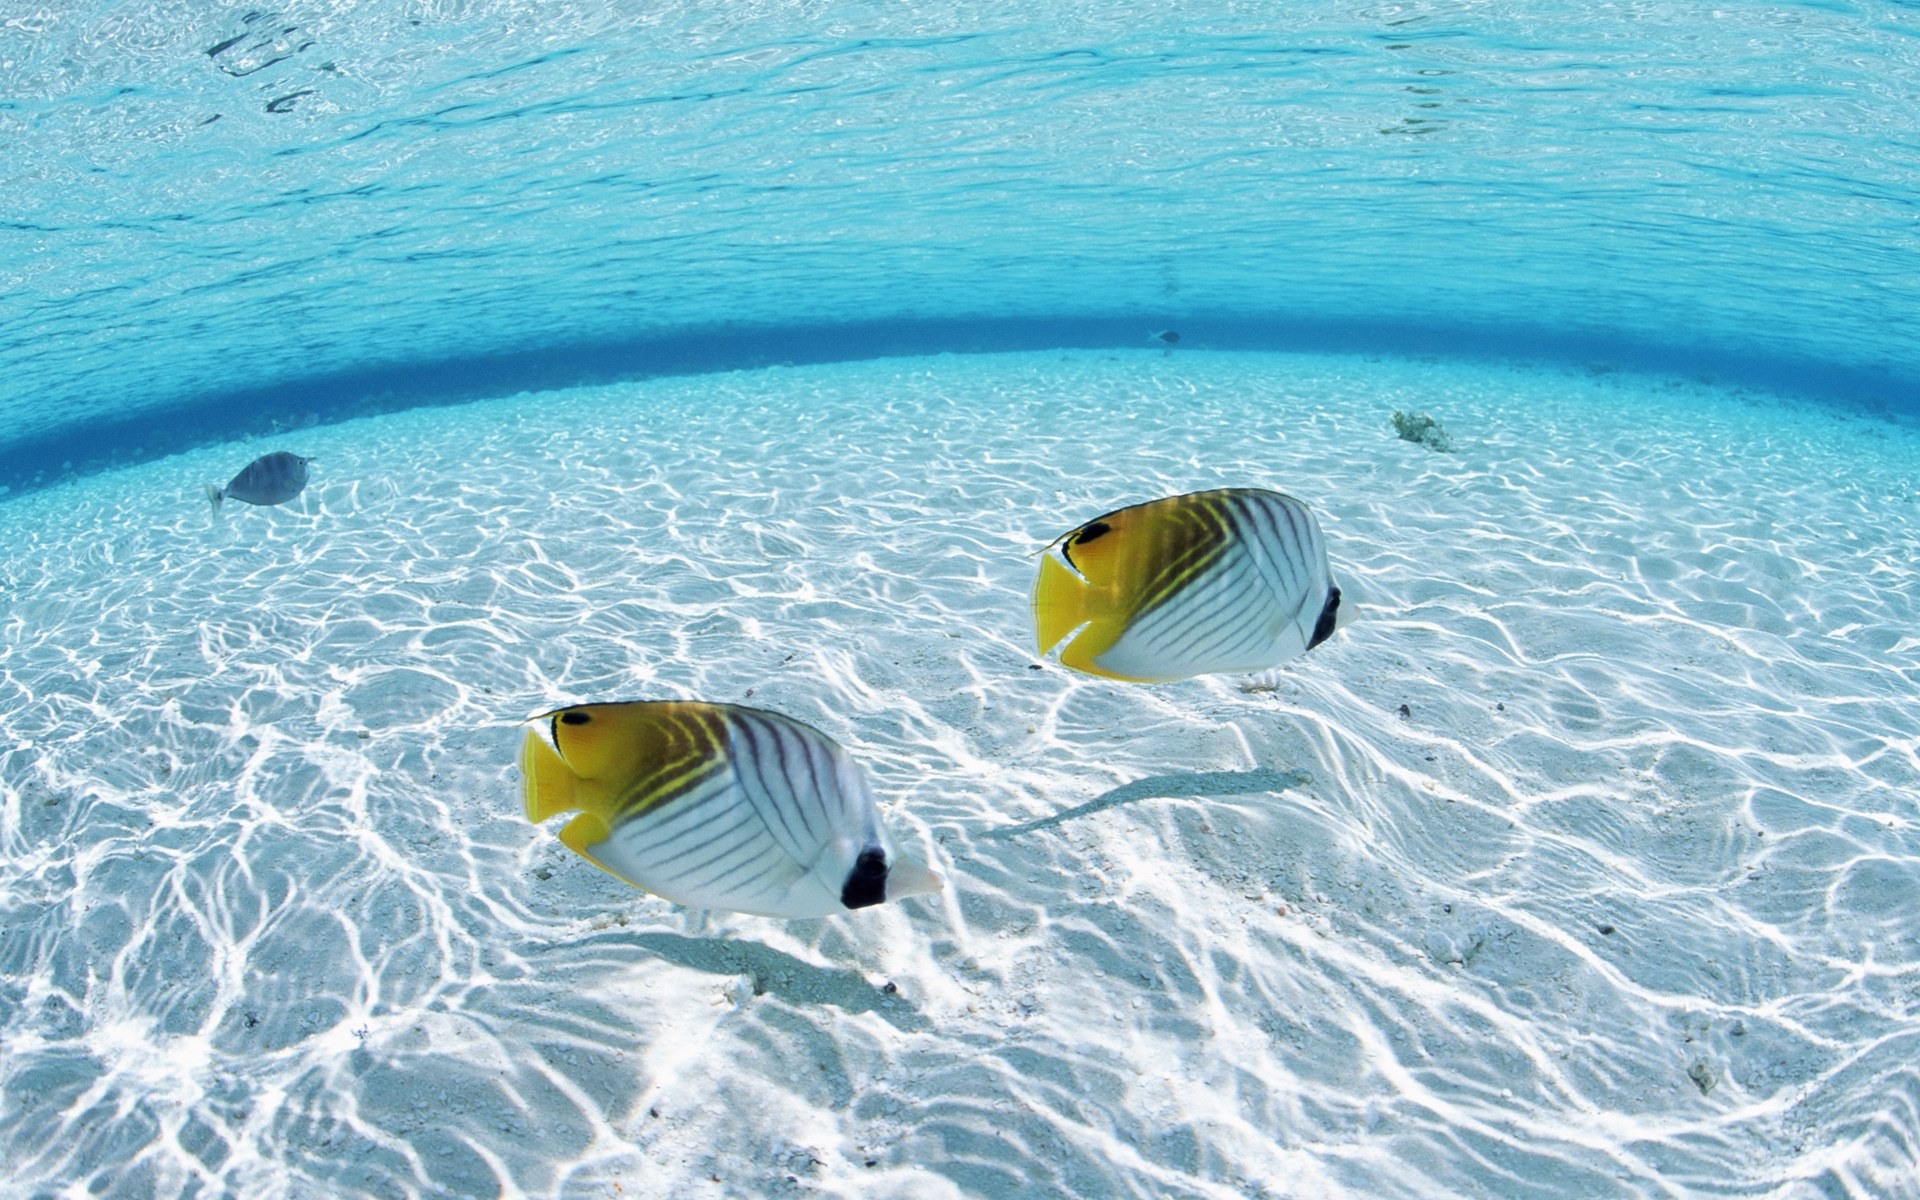 Fish In The Ocean Wallpaper For Your